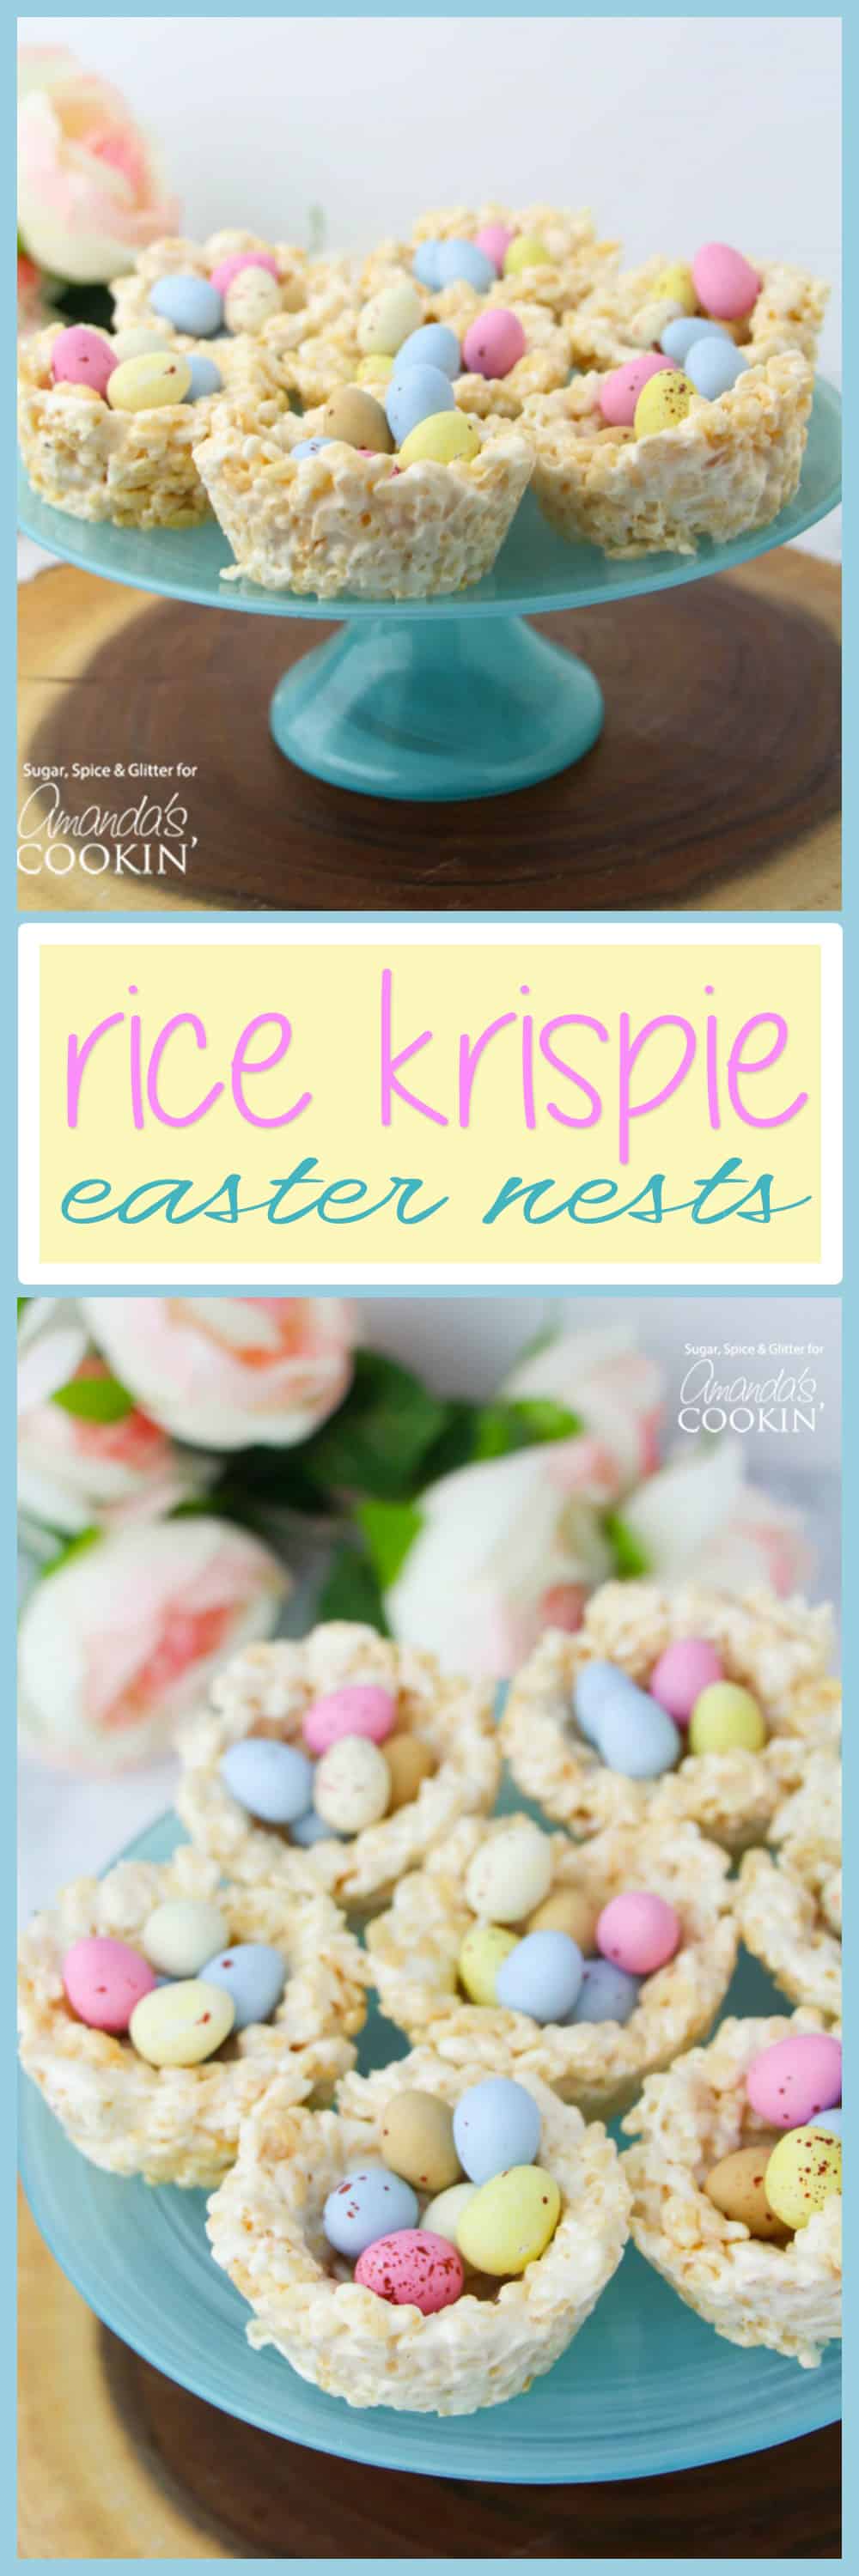 Rice Krispie Nests: a quick and easy no-bake Easter treat!